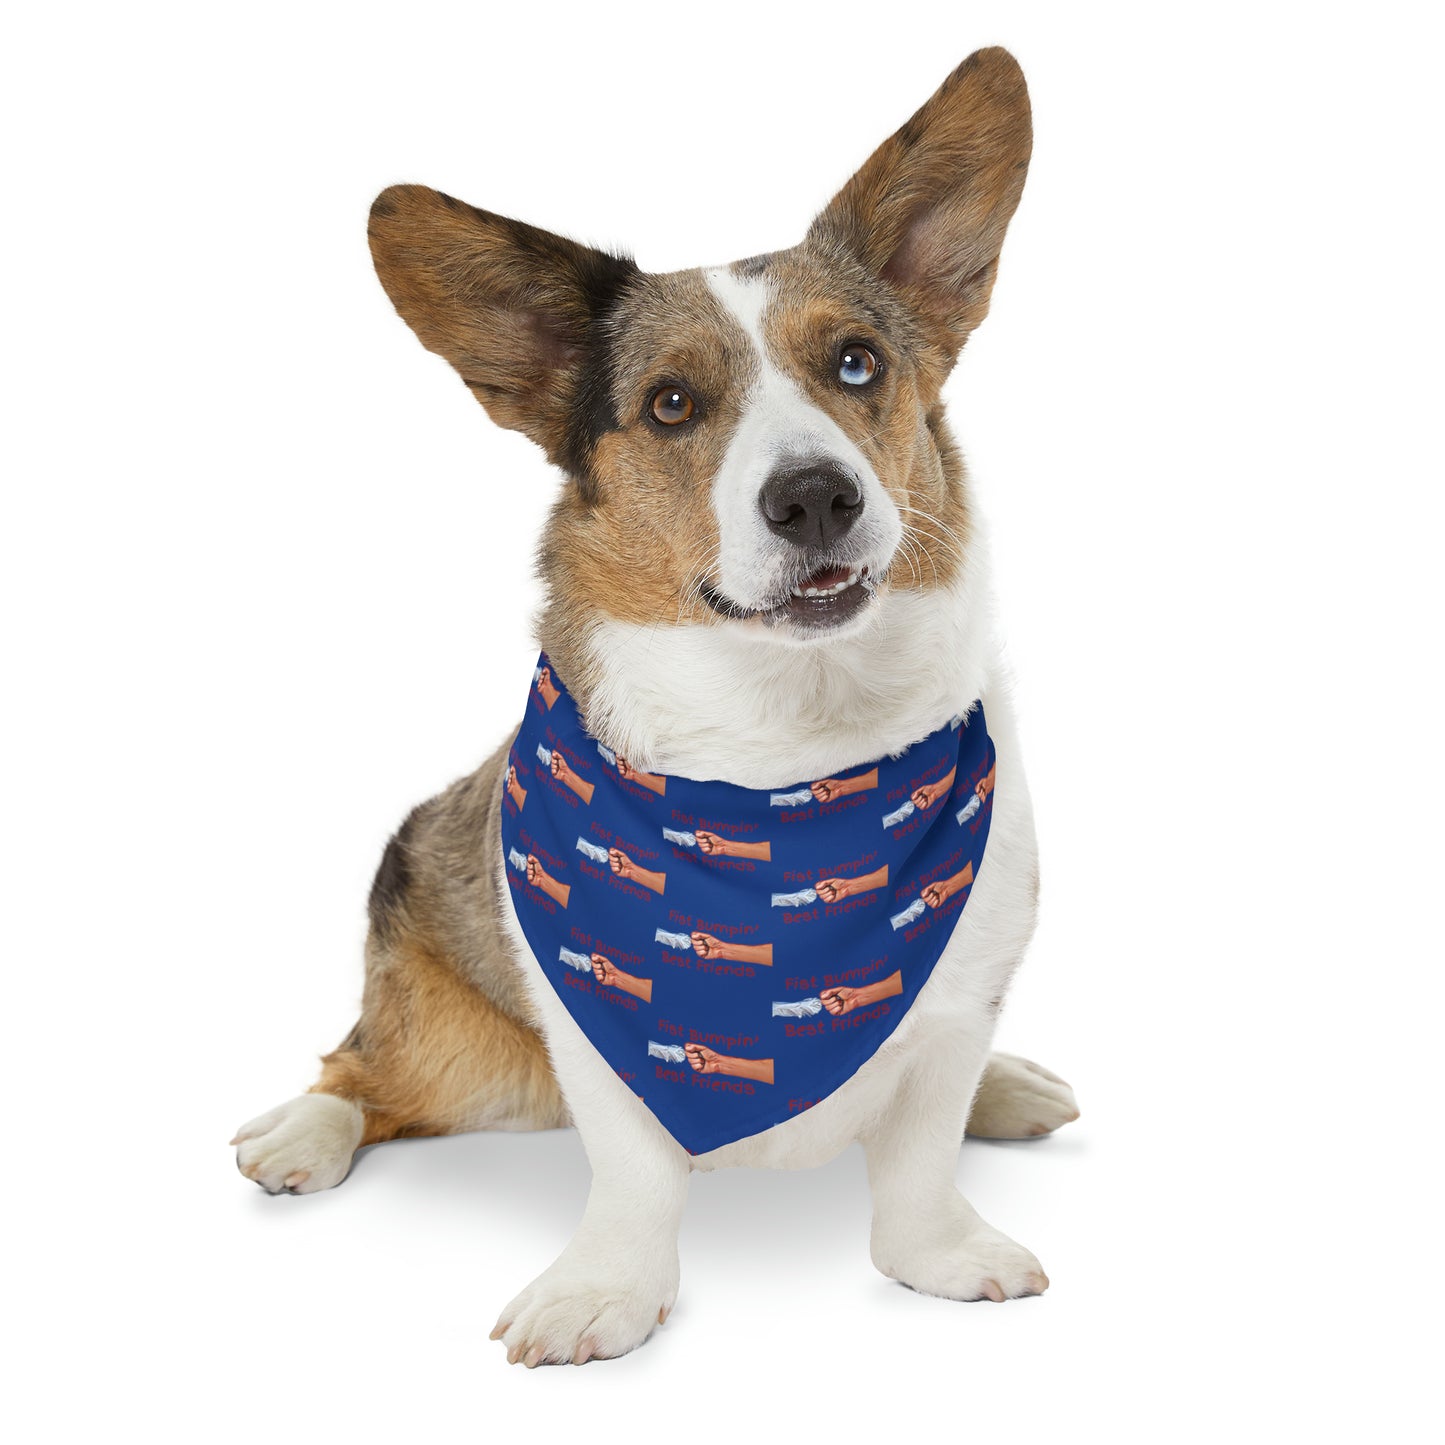 Fist Bumpin’ Best Friends Opie’s Cavalier King Charles Spaniel Pet Bandana Collar Blue with Red lettering.